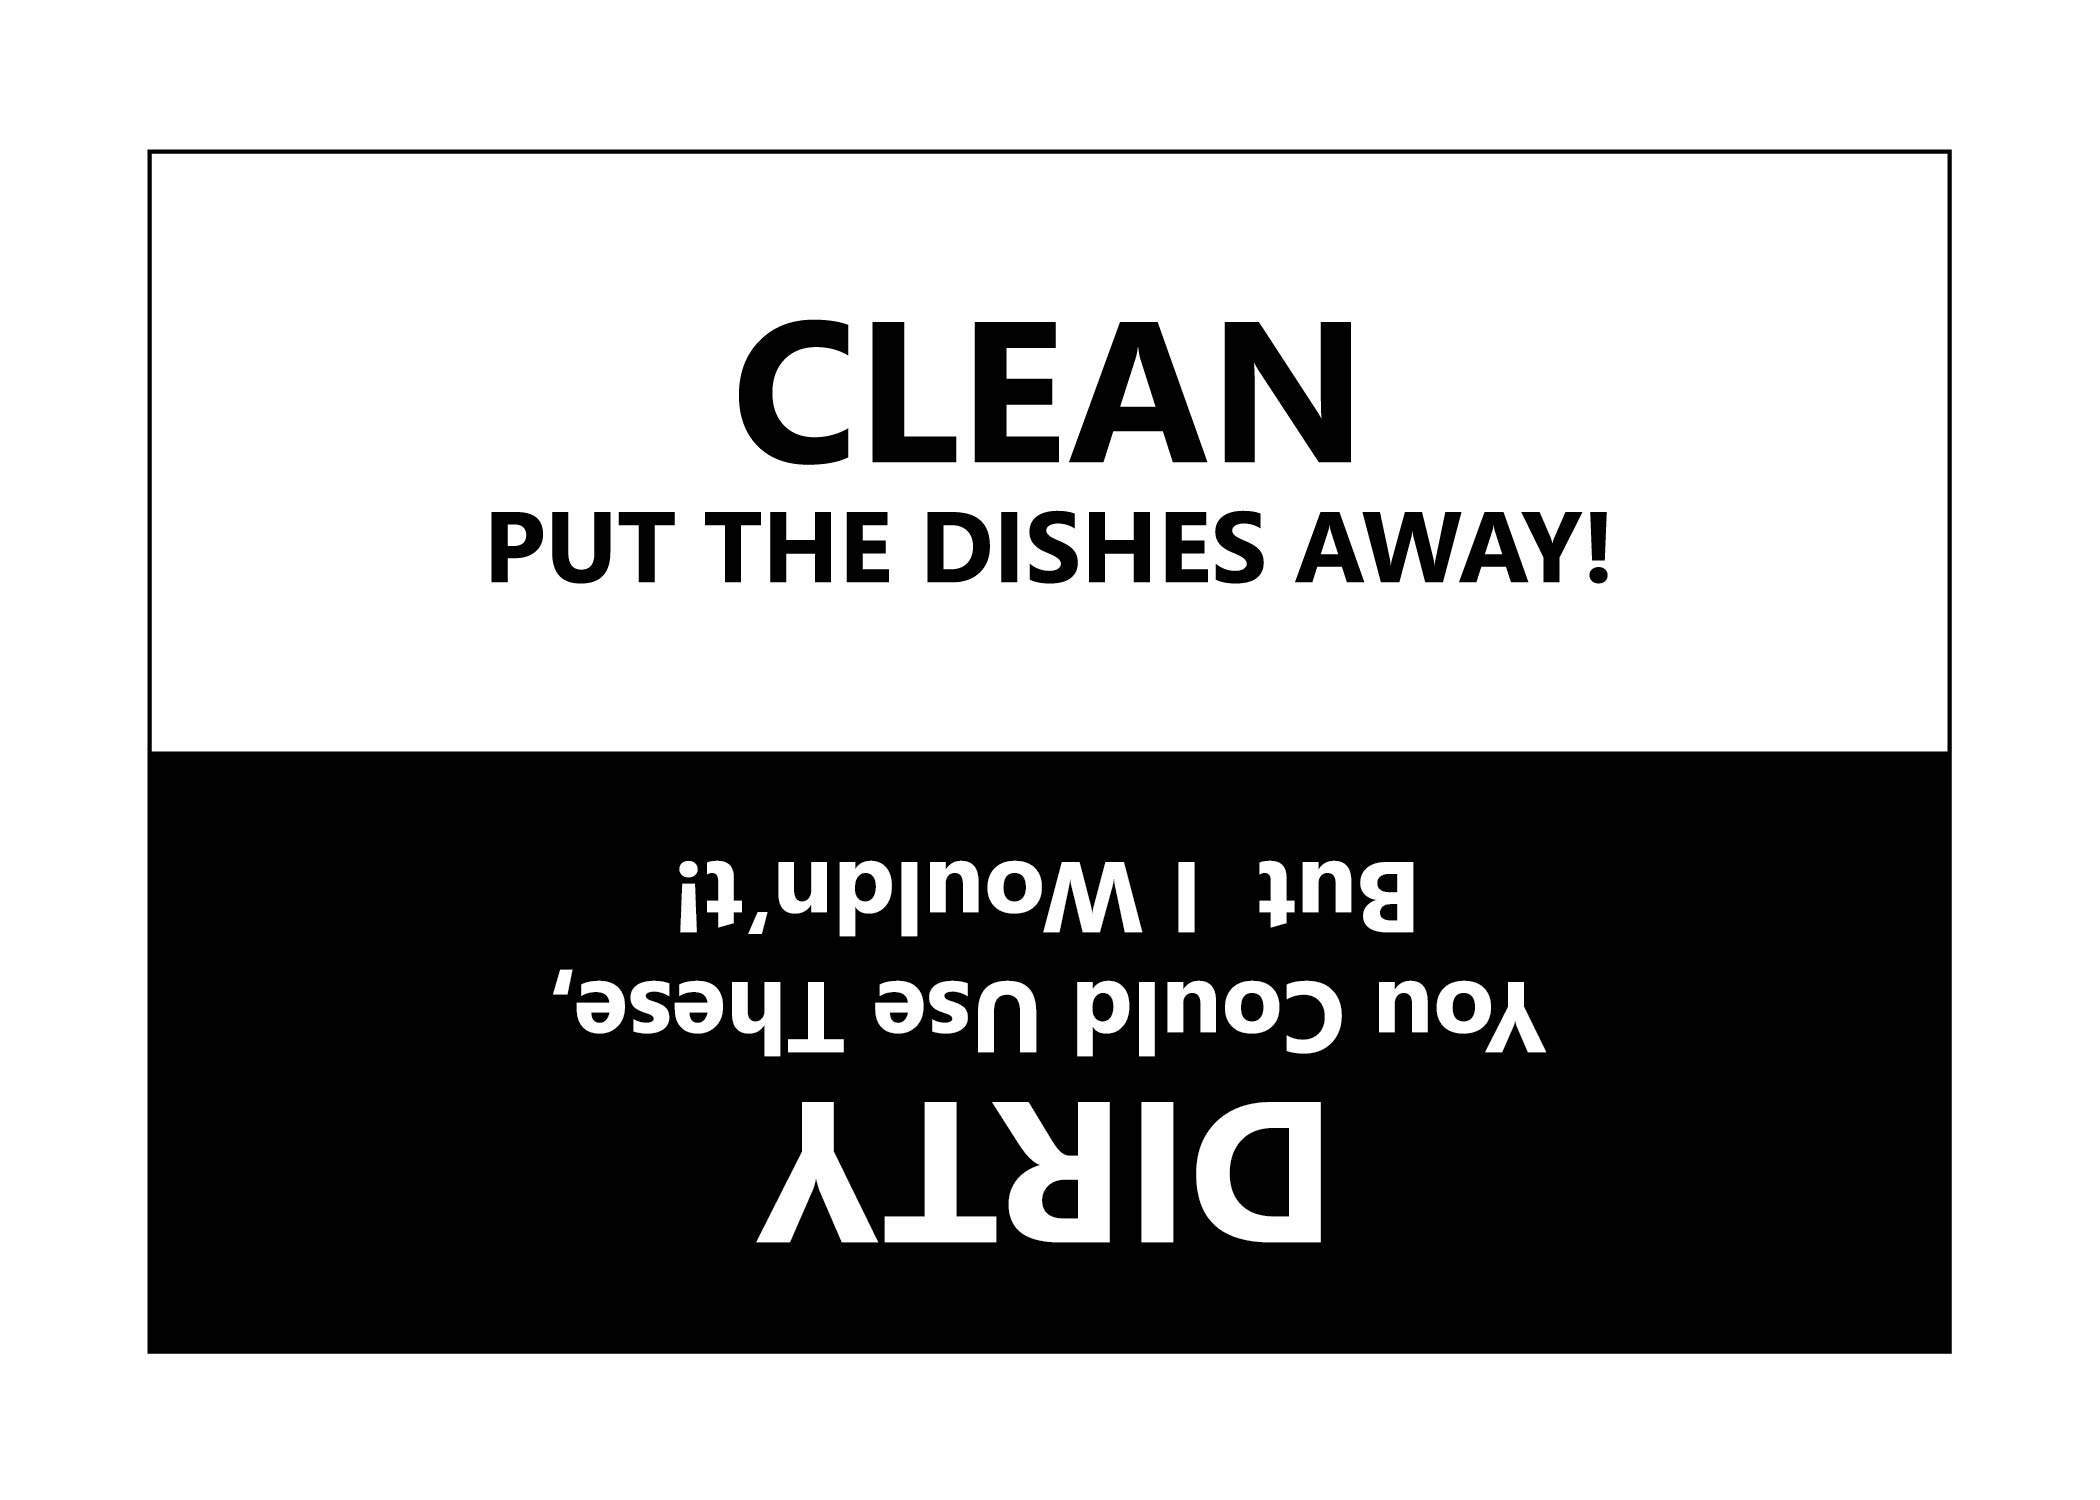 https://cdn11.bigcommerce.com/s-qdomswberb/images/stencil/original/products/466/944/Black_White_Clean_Dirty_Dishwasher_Sign_Funny-01__96787.1610658419.jpg